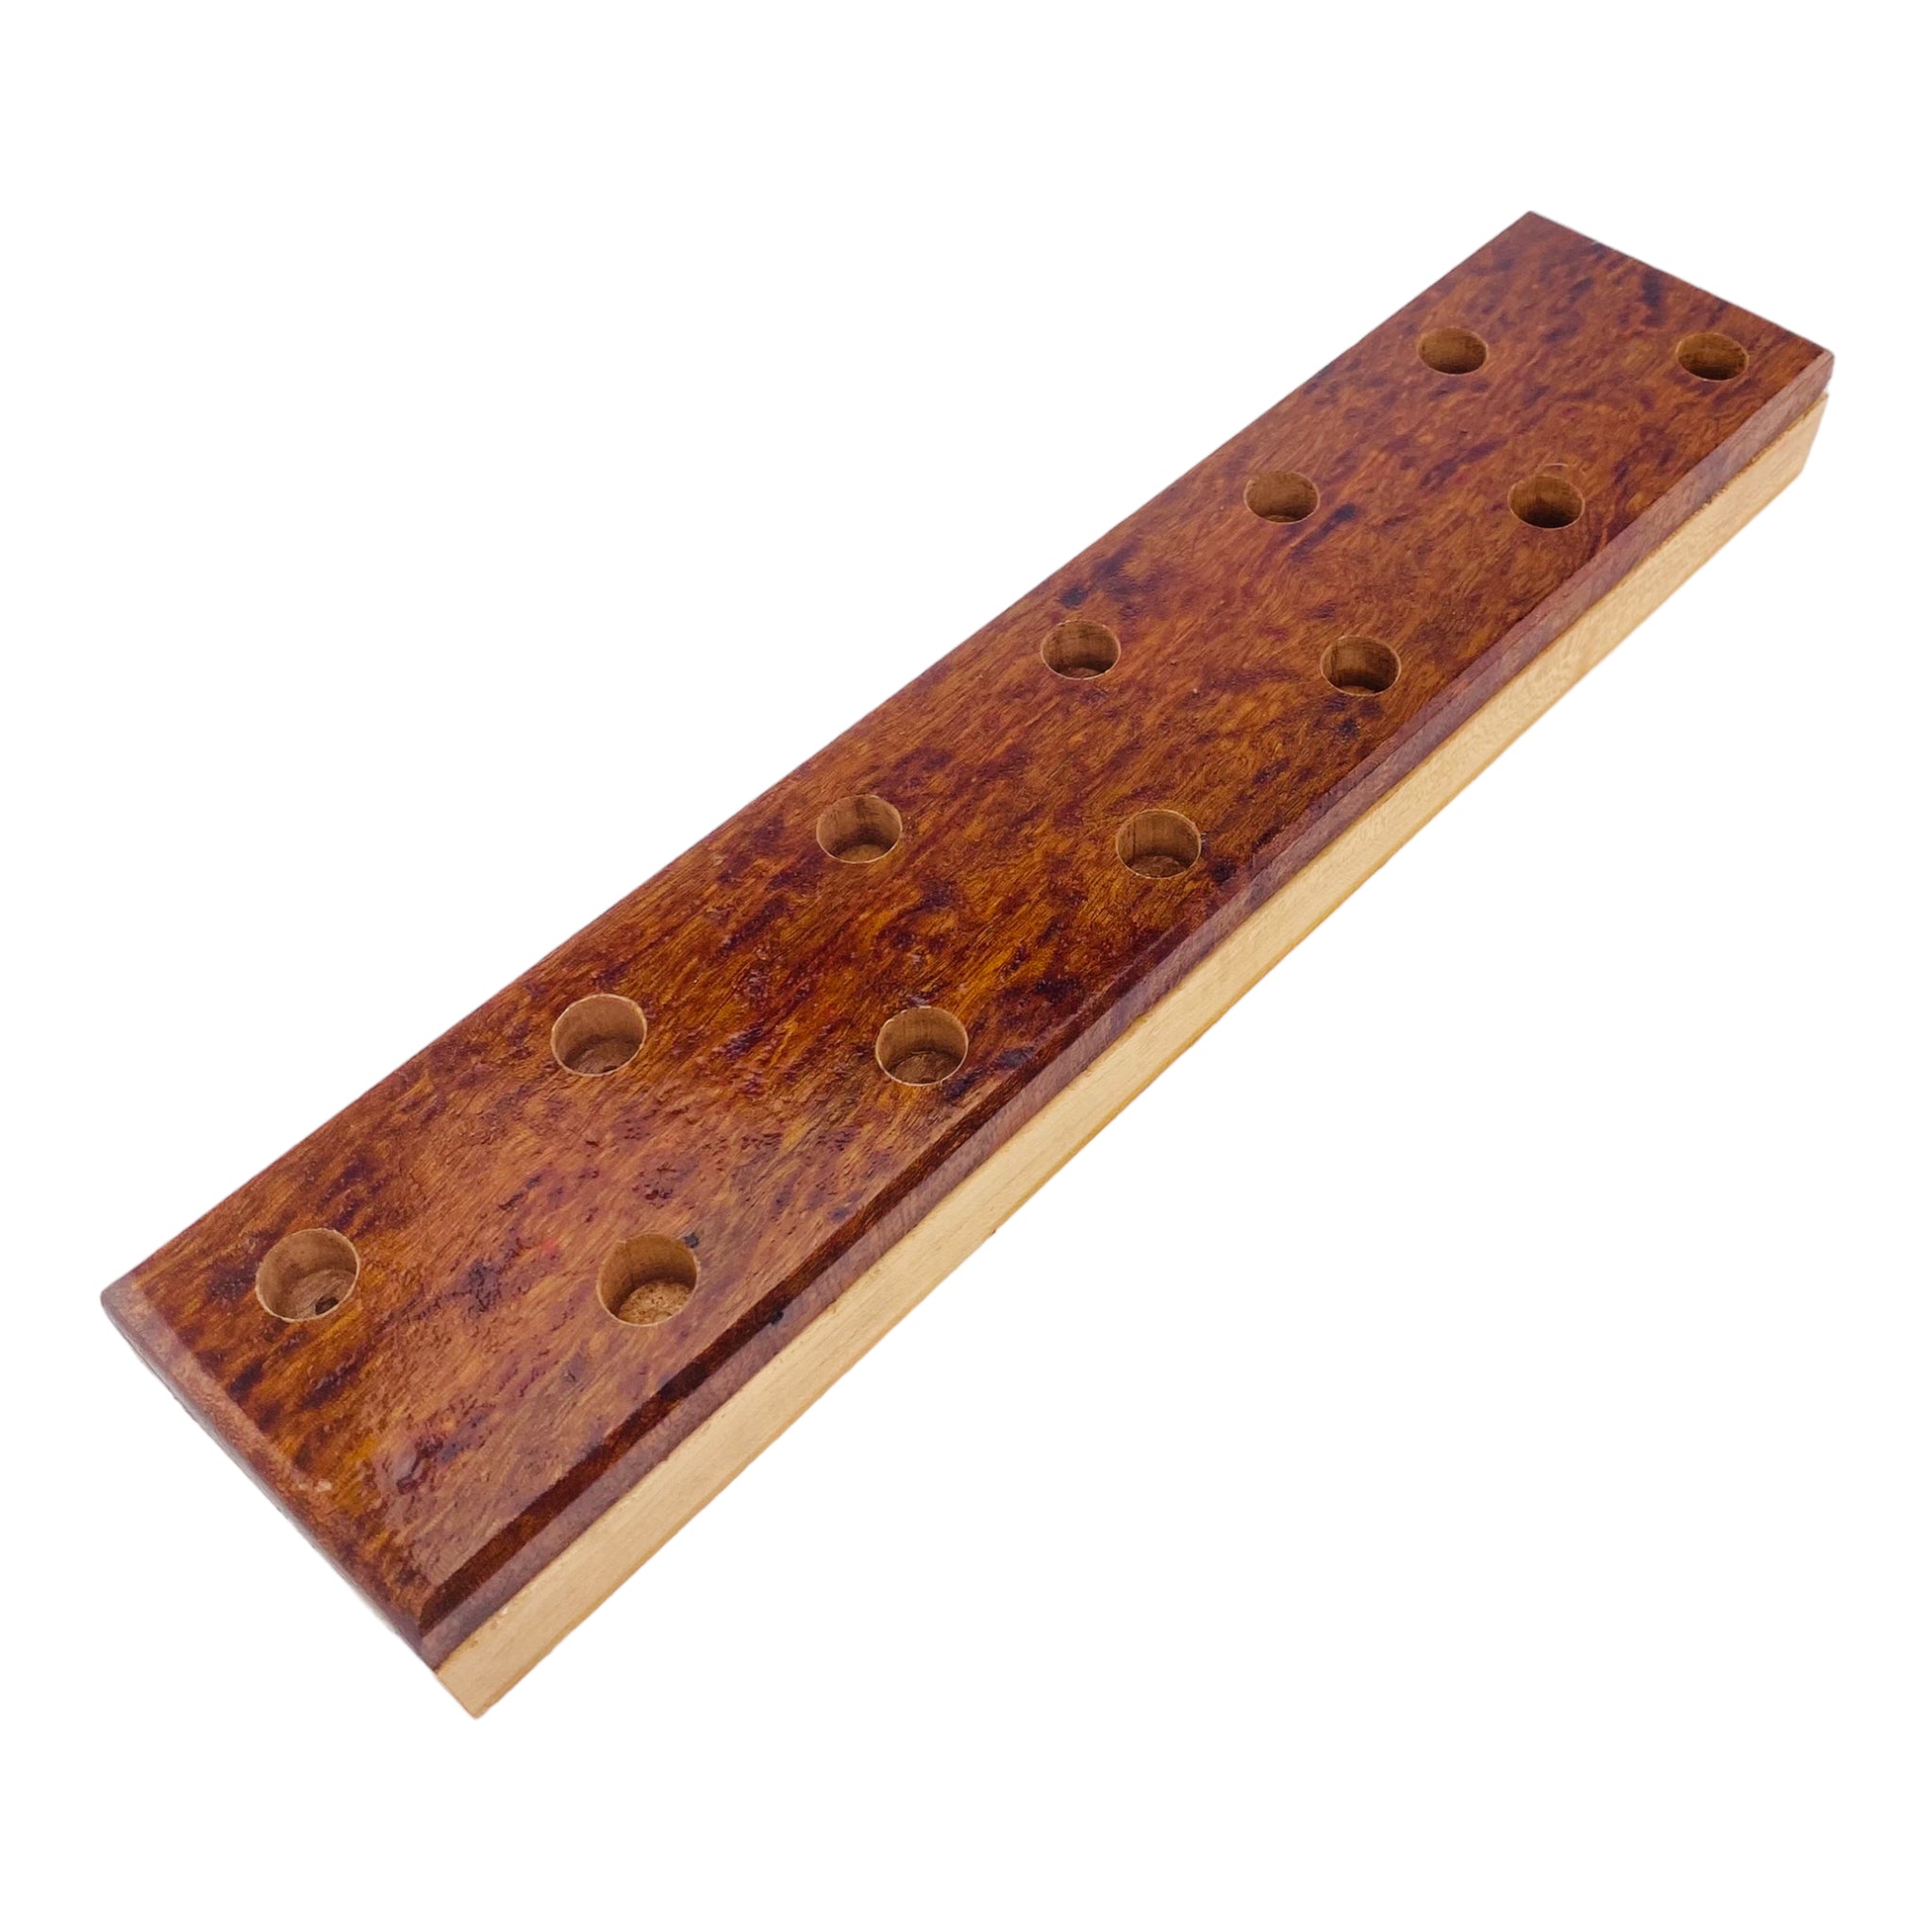 12 Hole Wood Display Stand Holder For 14mm Bong Bowl Pieces Or Quartz Bangers